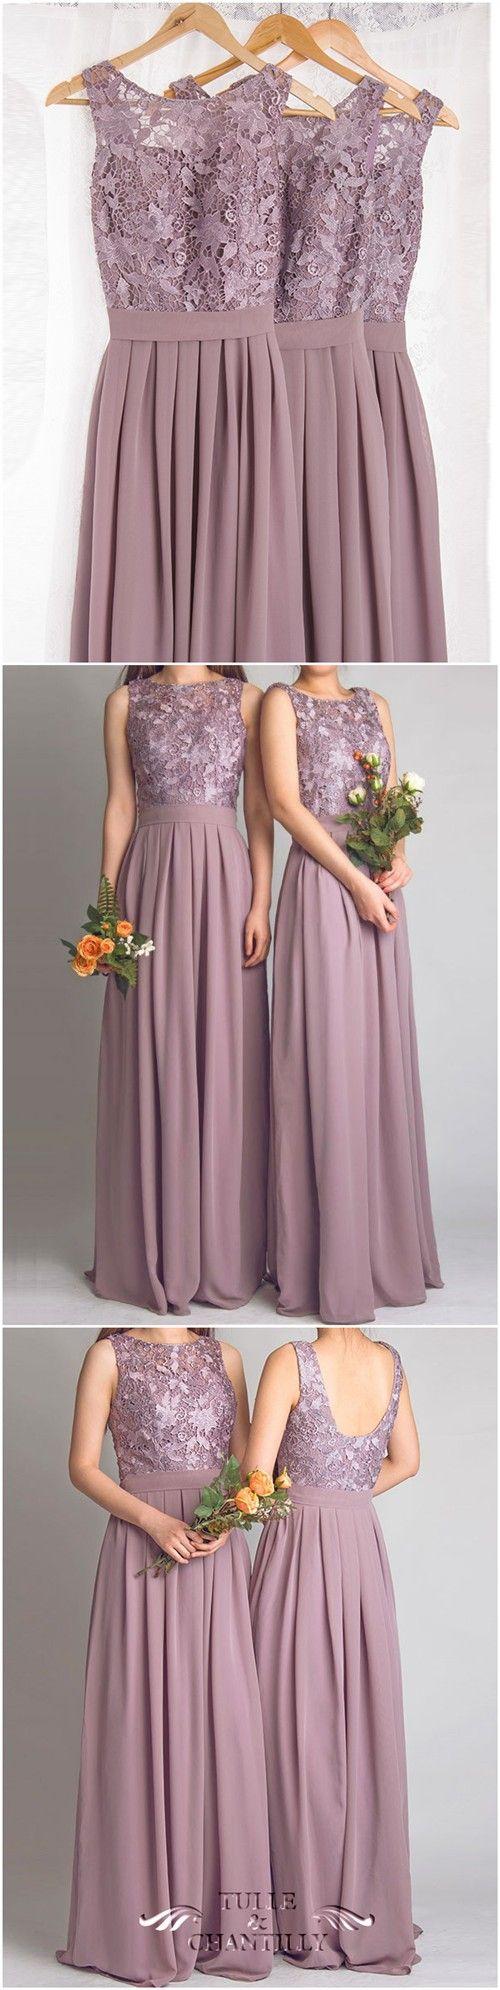 Wedding - Dramatic Vintage Lace Bridesmaid Dress With Flowing Chiffon Skirt [TBQP227] - $169.00 : Custom Made Wedding, Prom, Evening Dresses Online